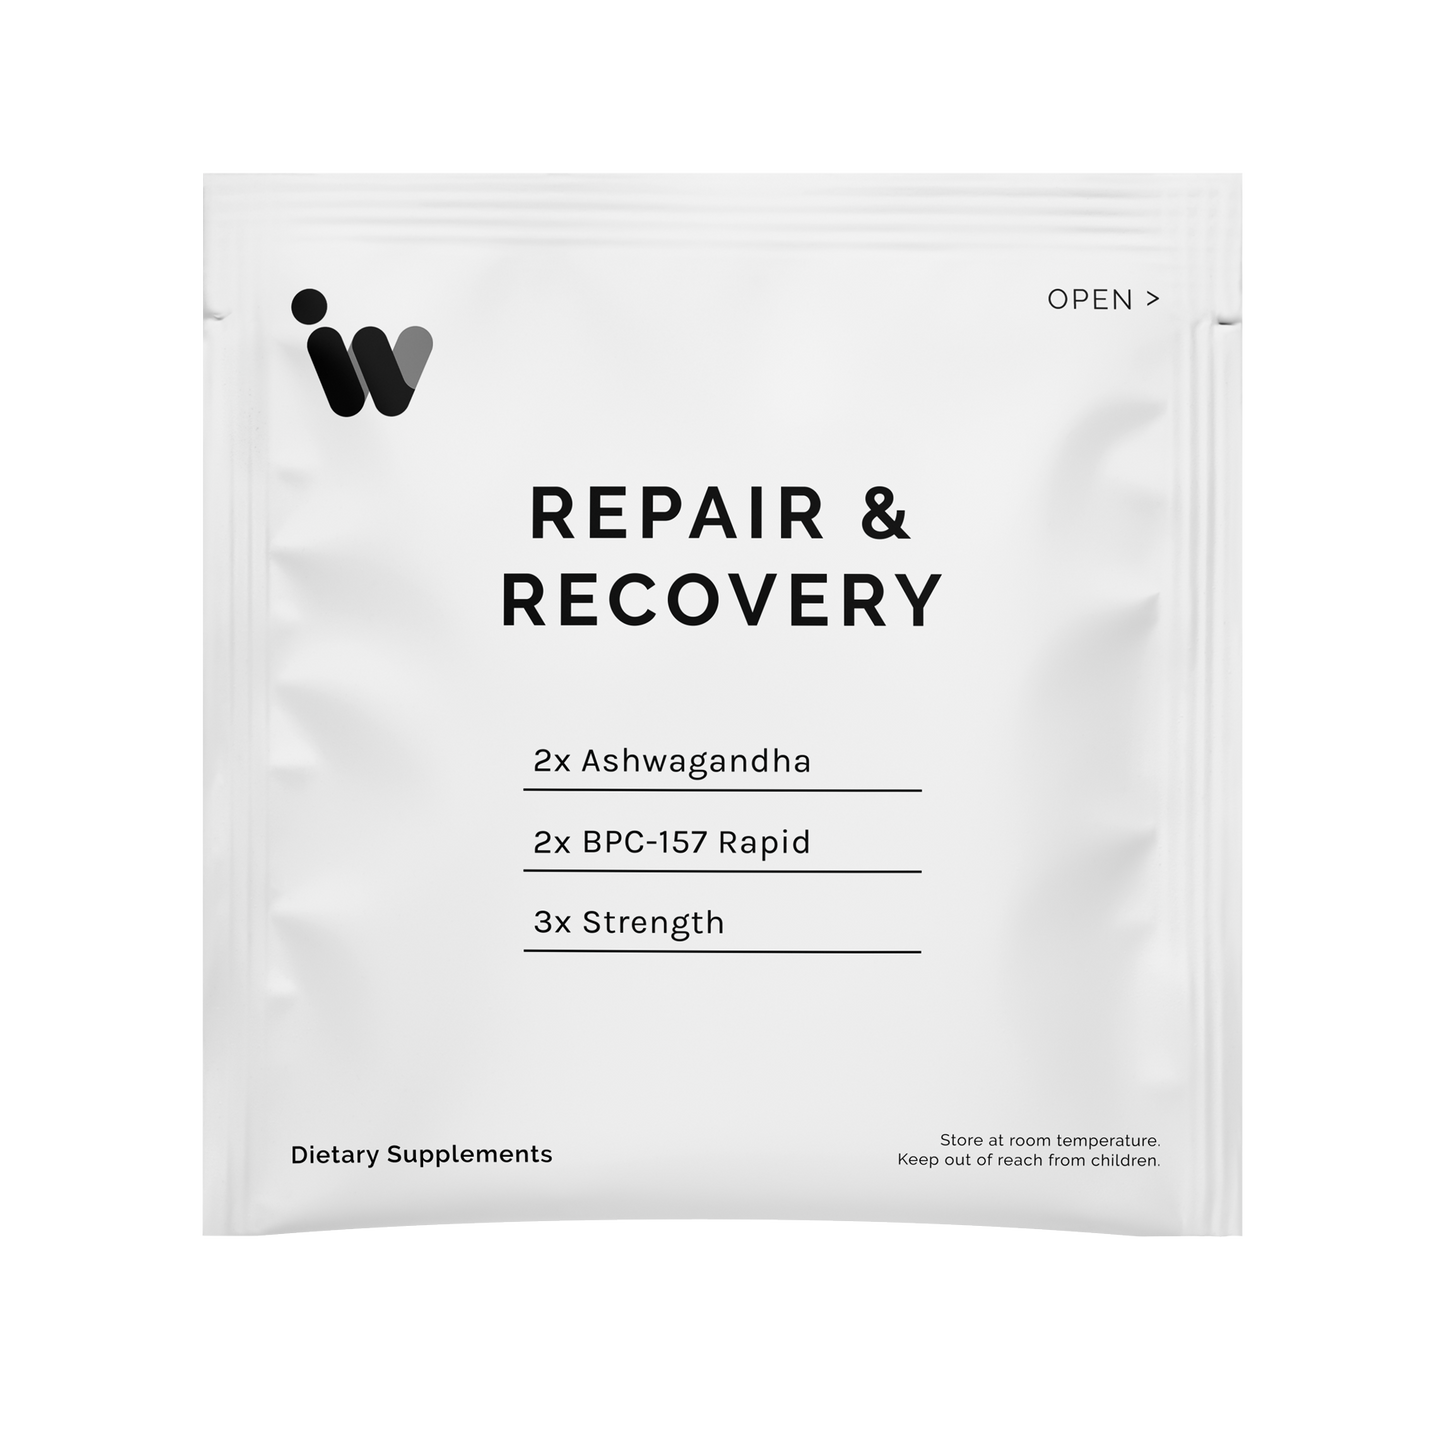 Repair And Recovery ExactPax™